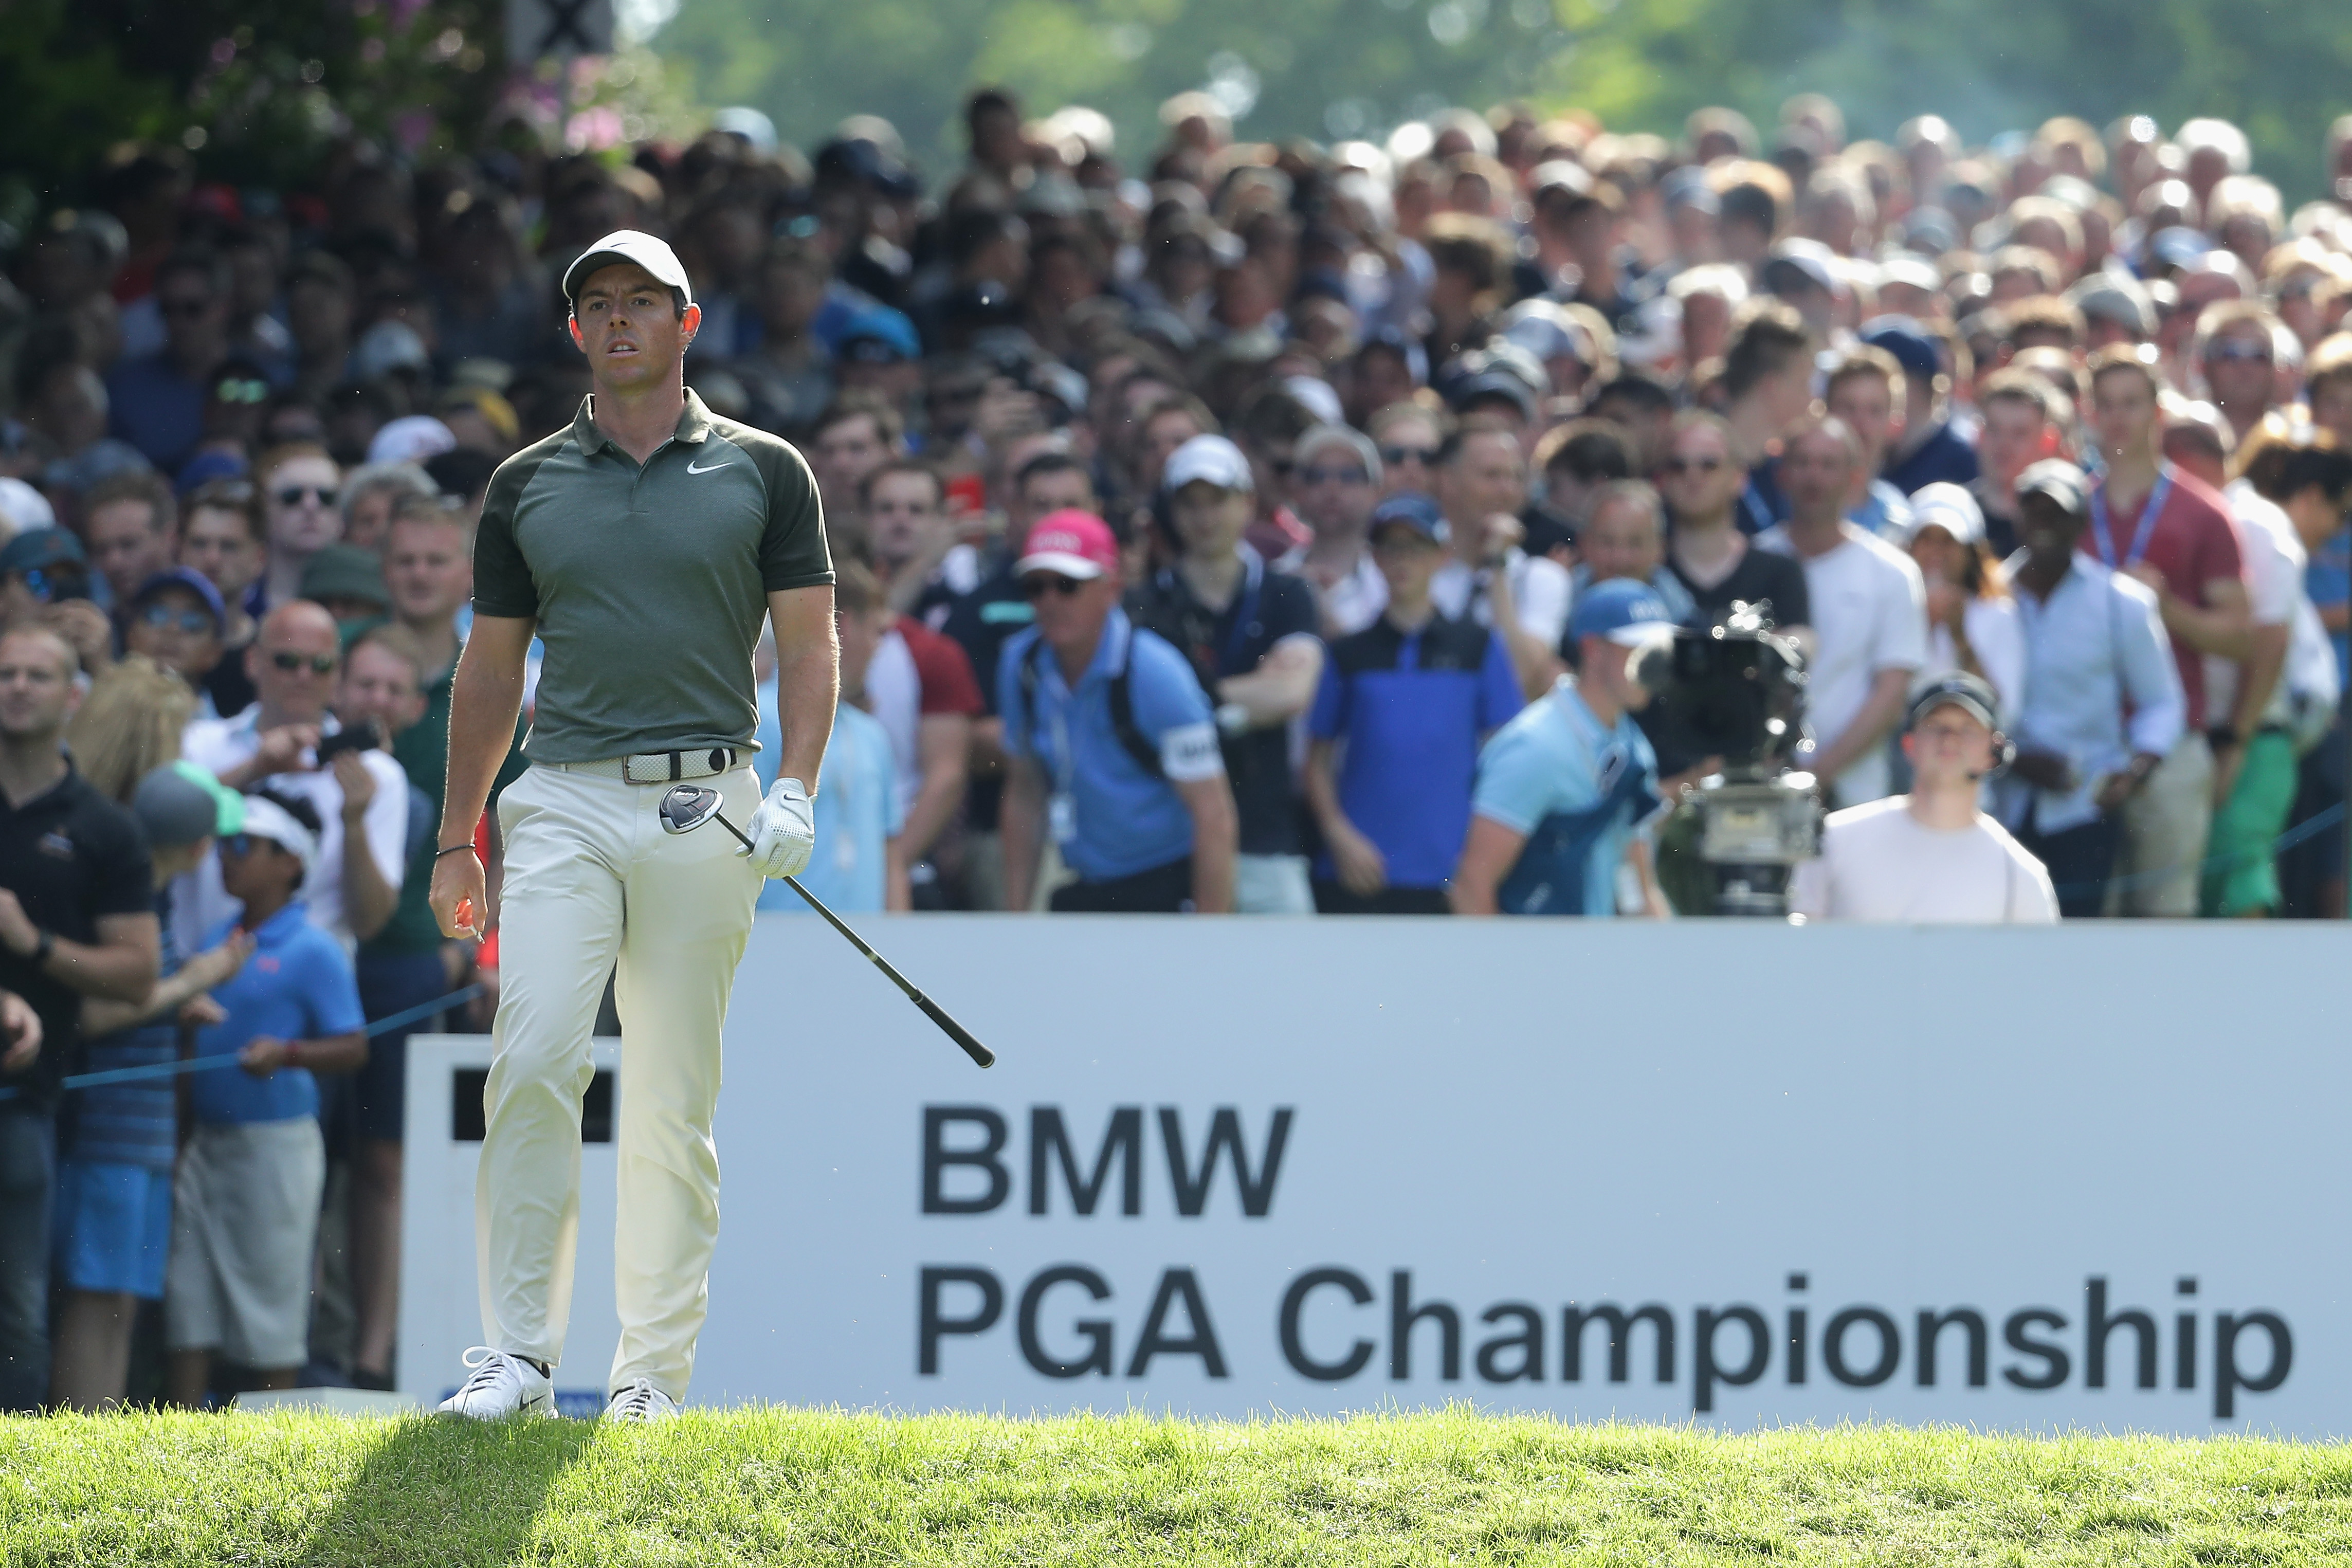 McIlroy recovers to share lead with Molinari at BMW PGA